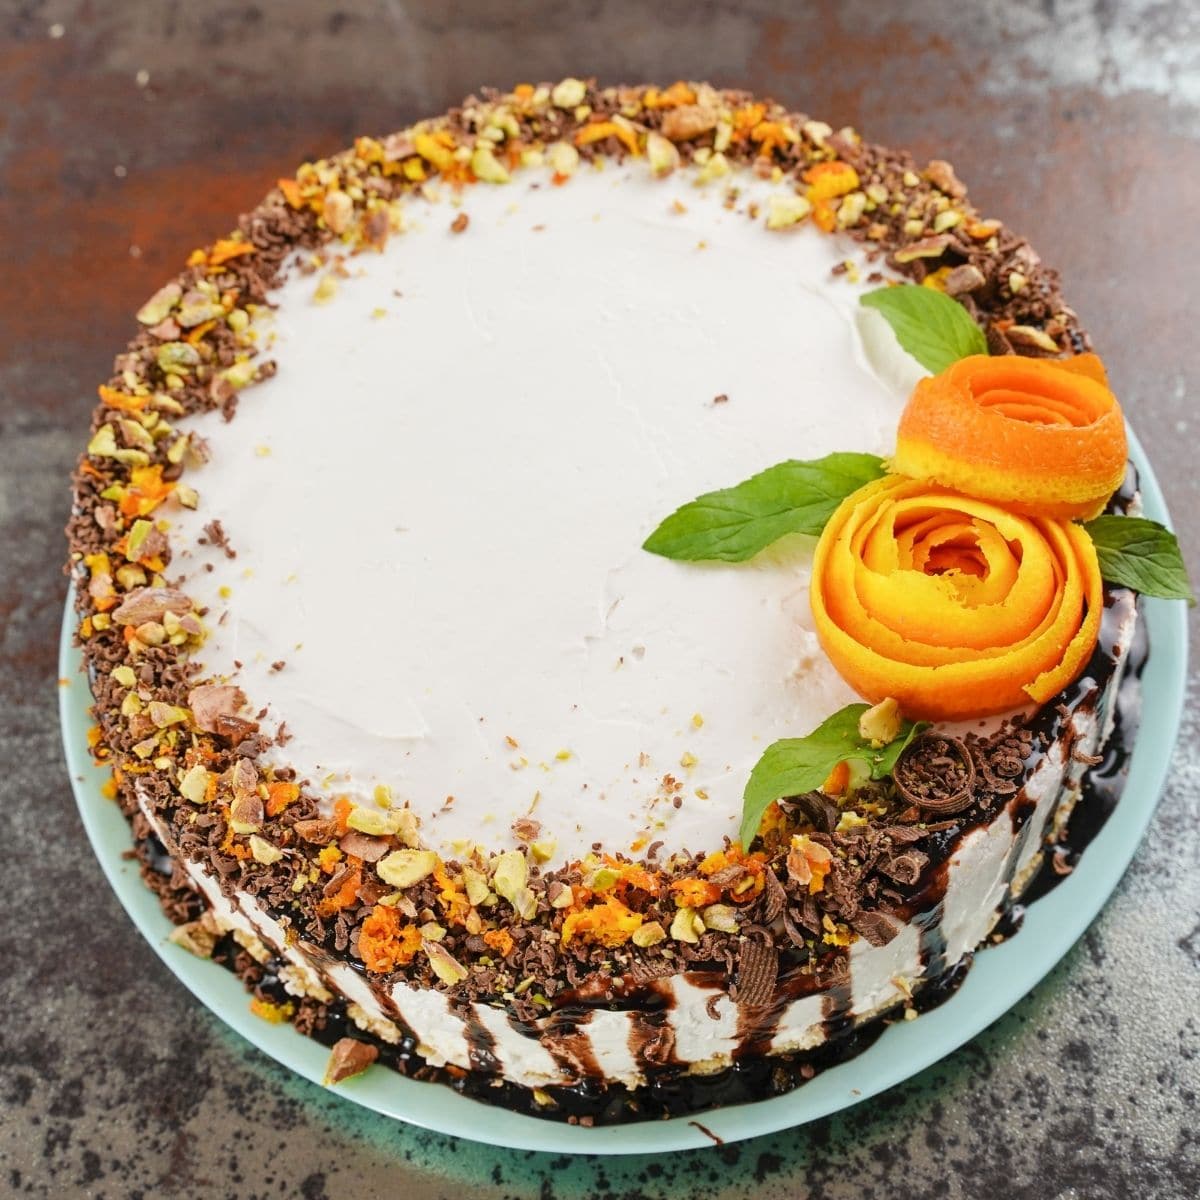 Cheesecake topped with chocolate syrup and orange roses on teal plate